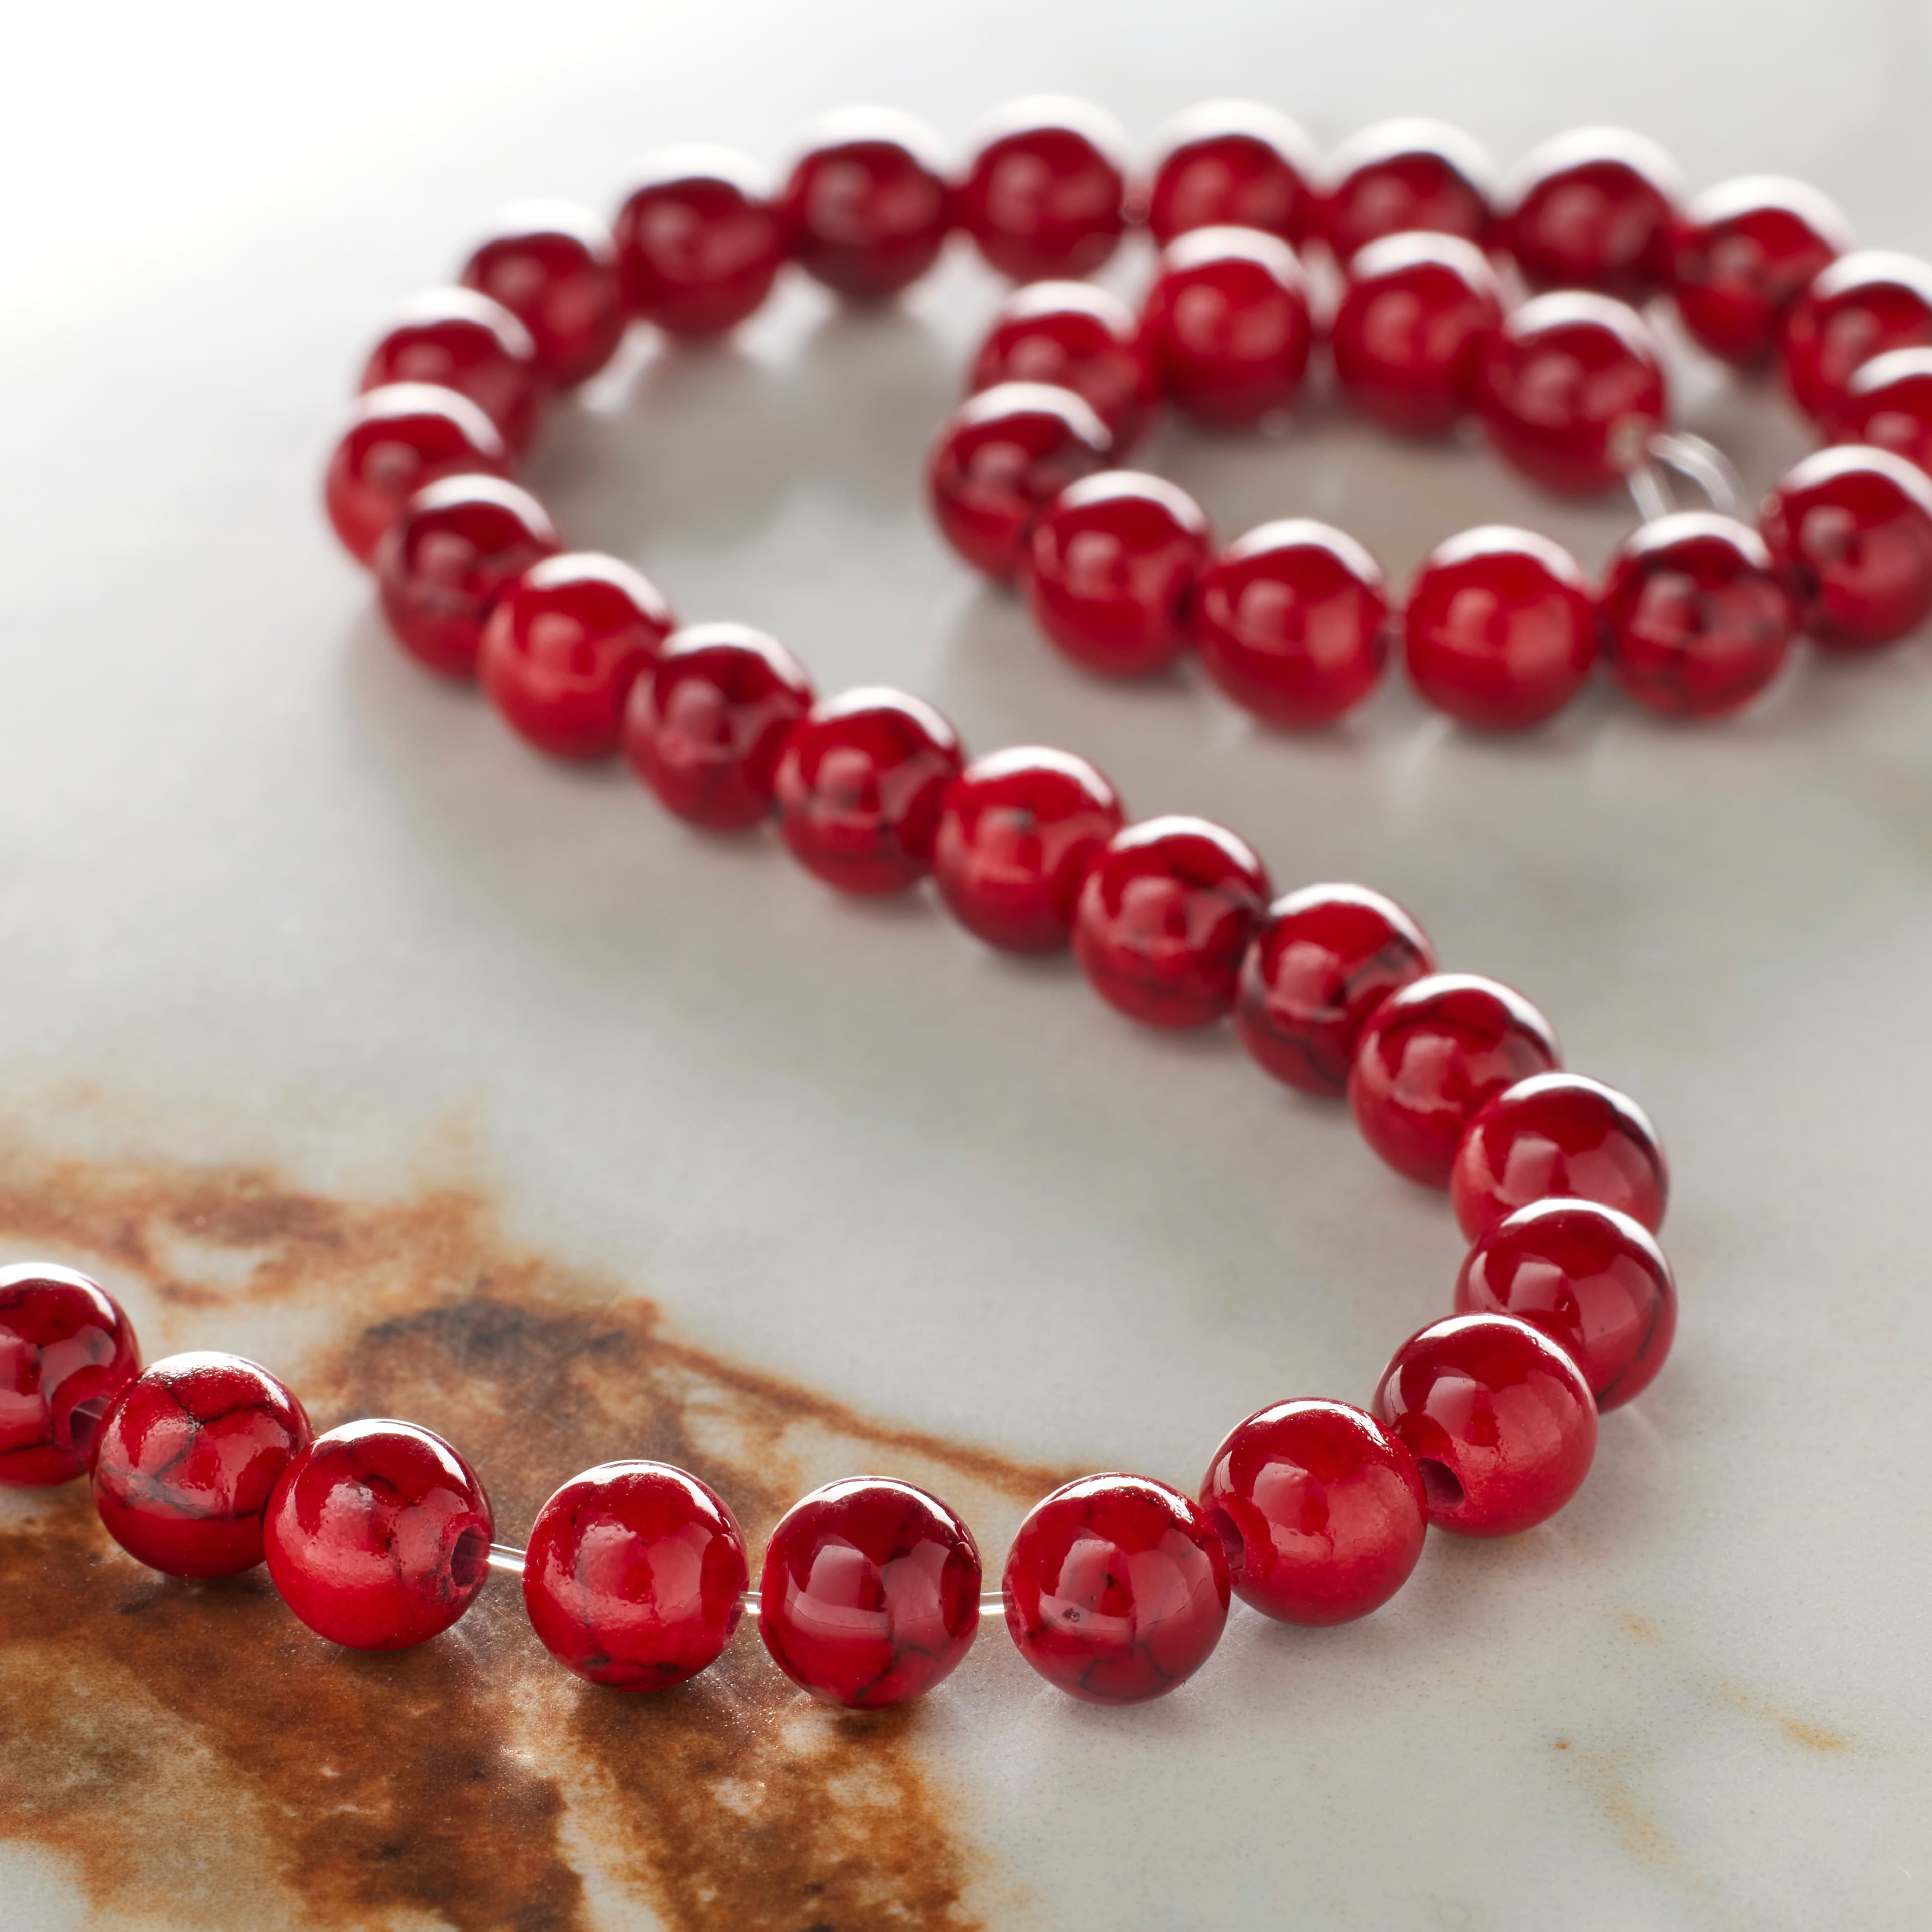 12 Pack: Red Quartz Round Beads, 6mm by Bead Landing™